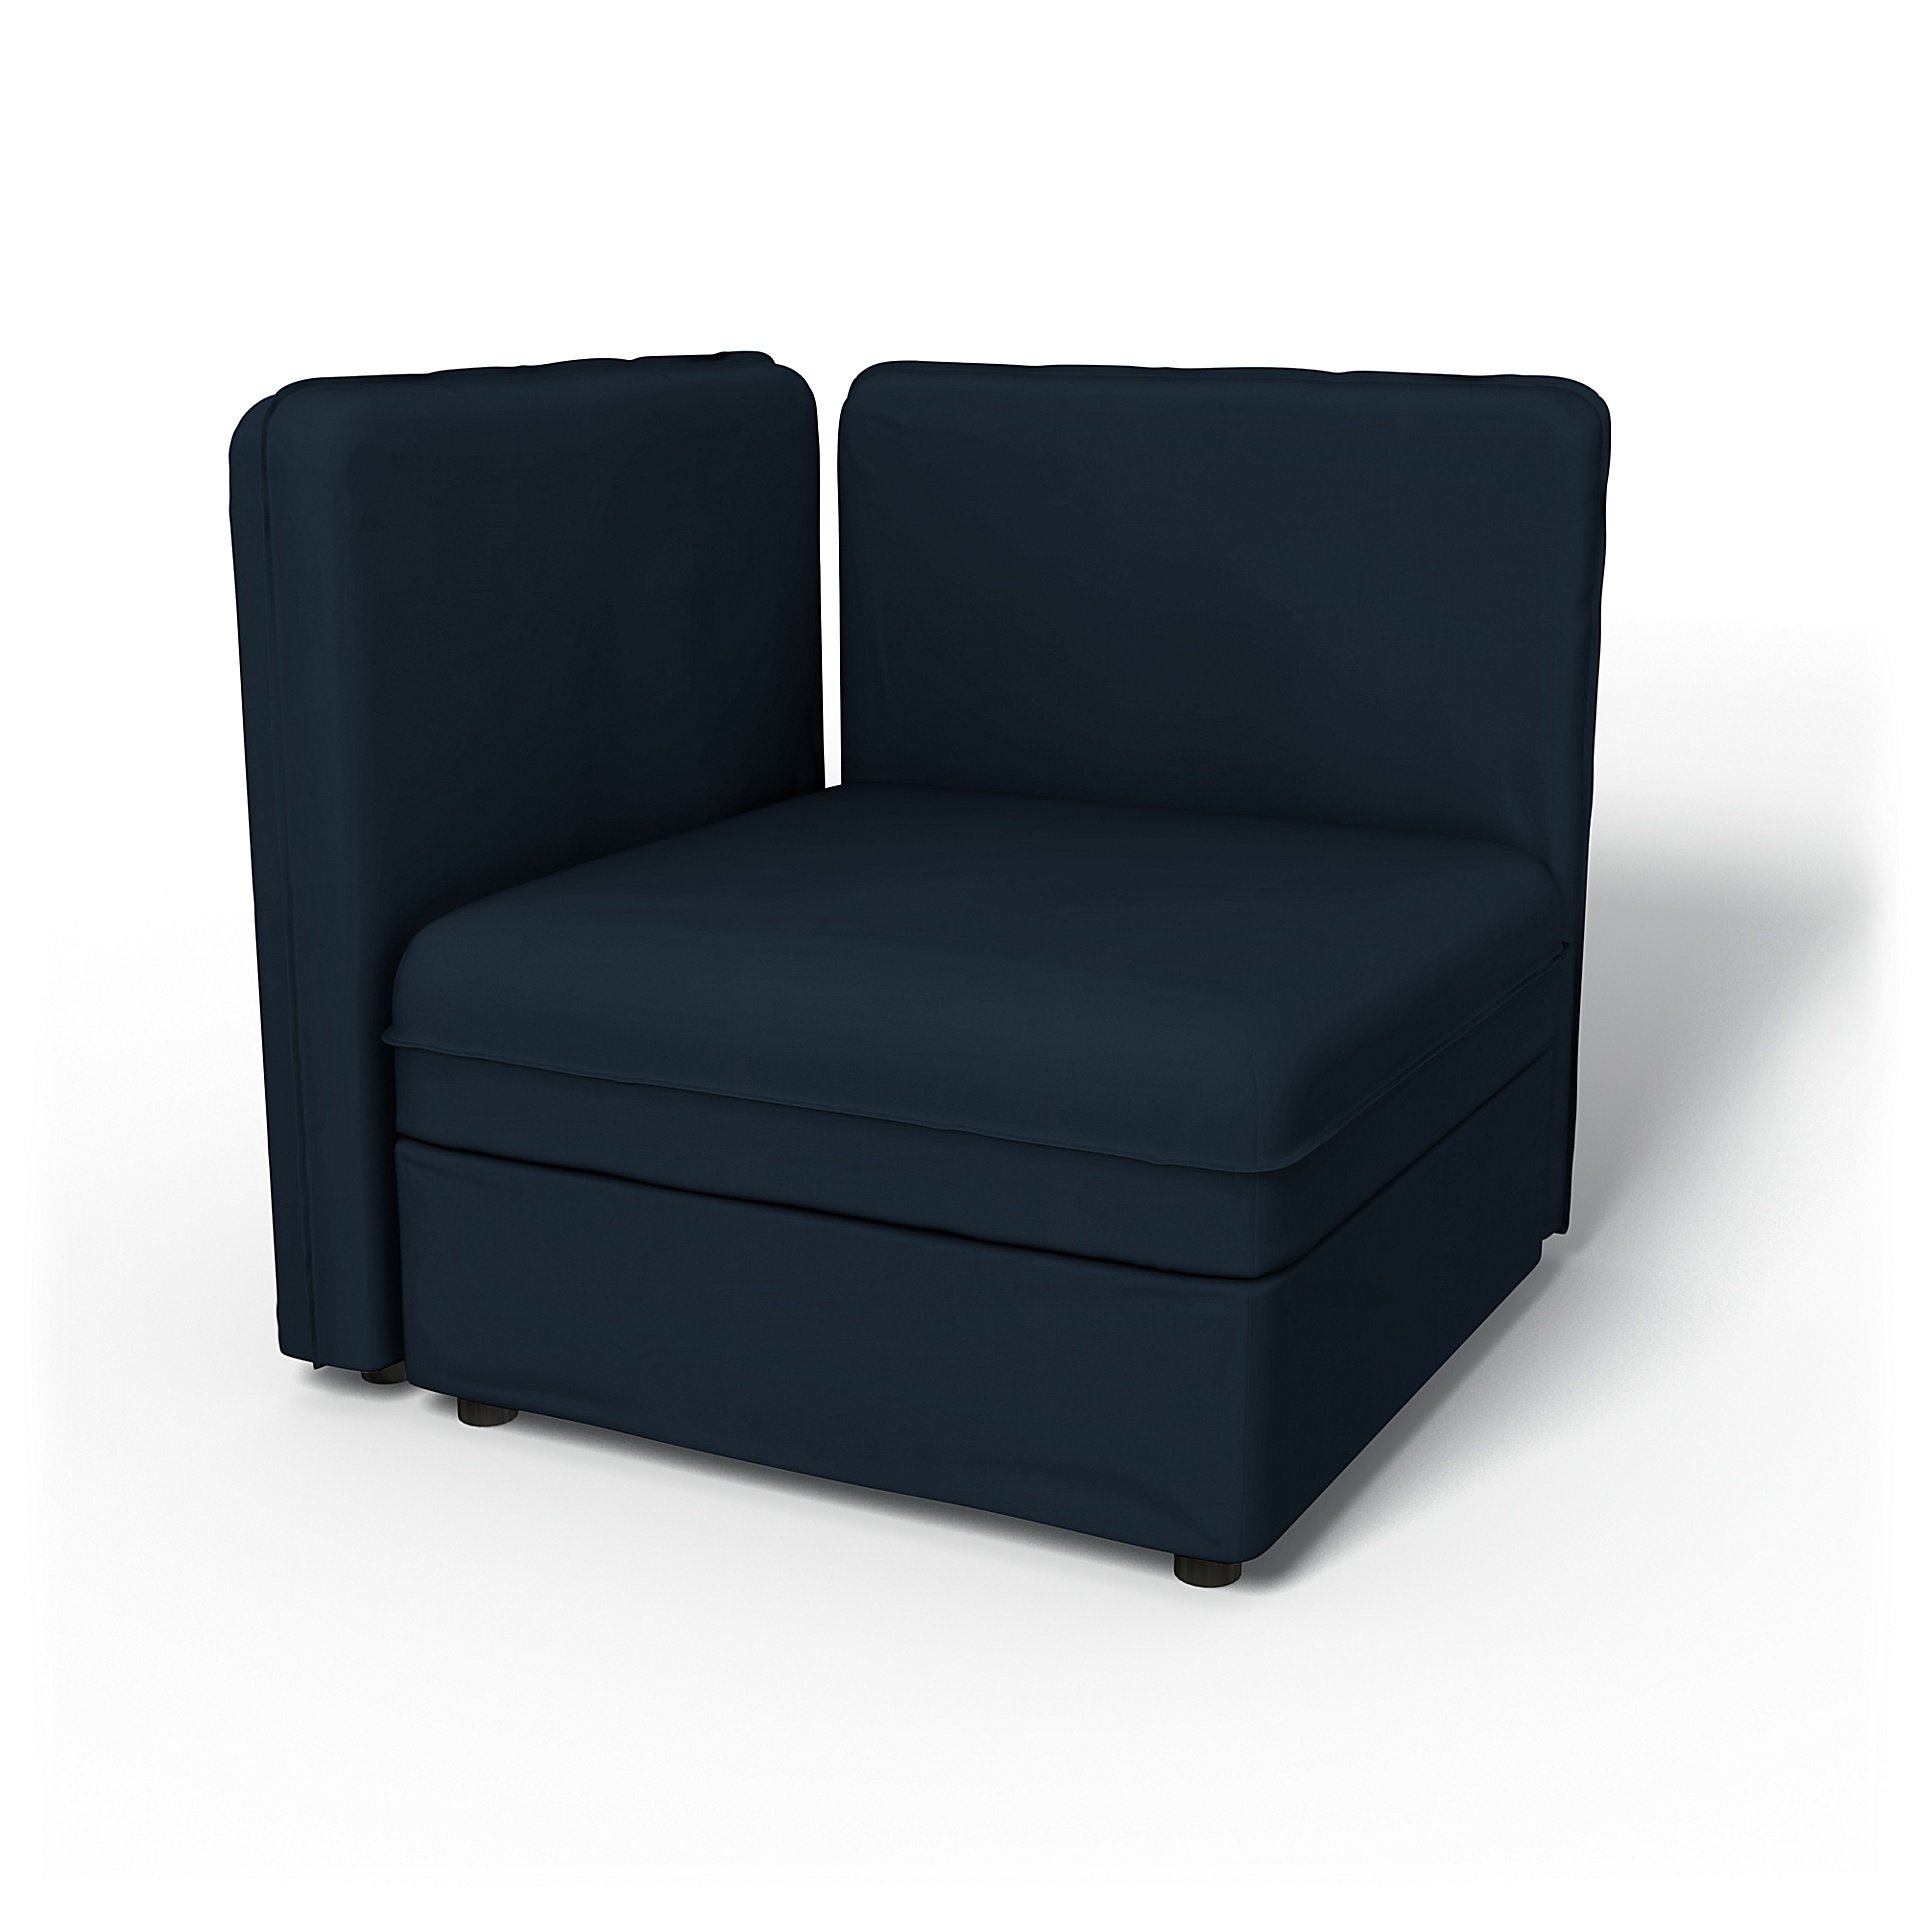 IKEA - Vallentuna Seat Module with Low Back and Storage Cover 80x80cm 32x32in, Navy Blue, Cotton - B